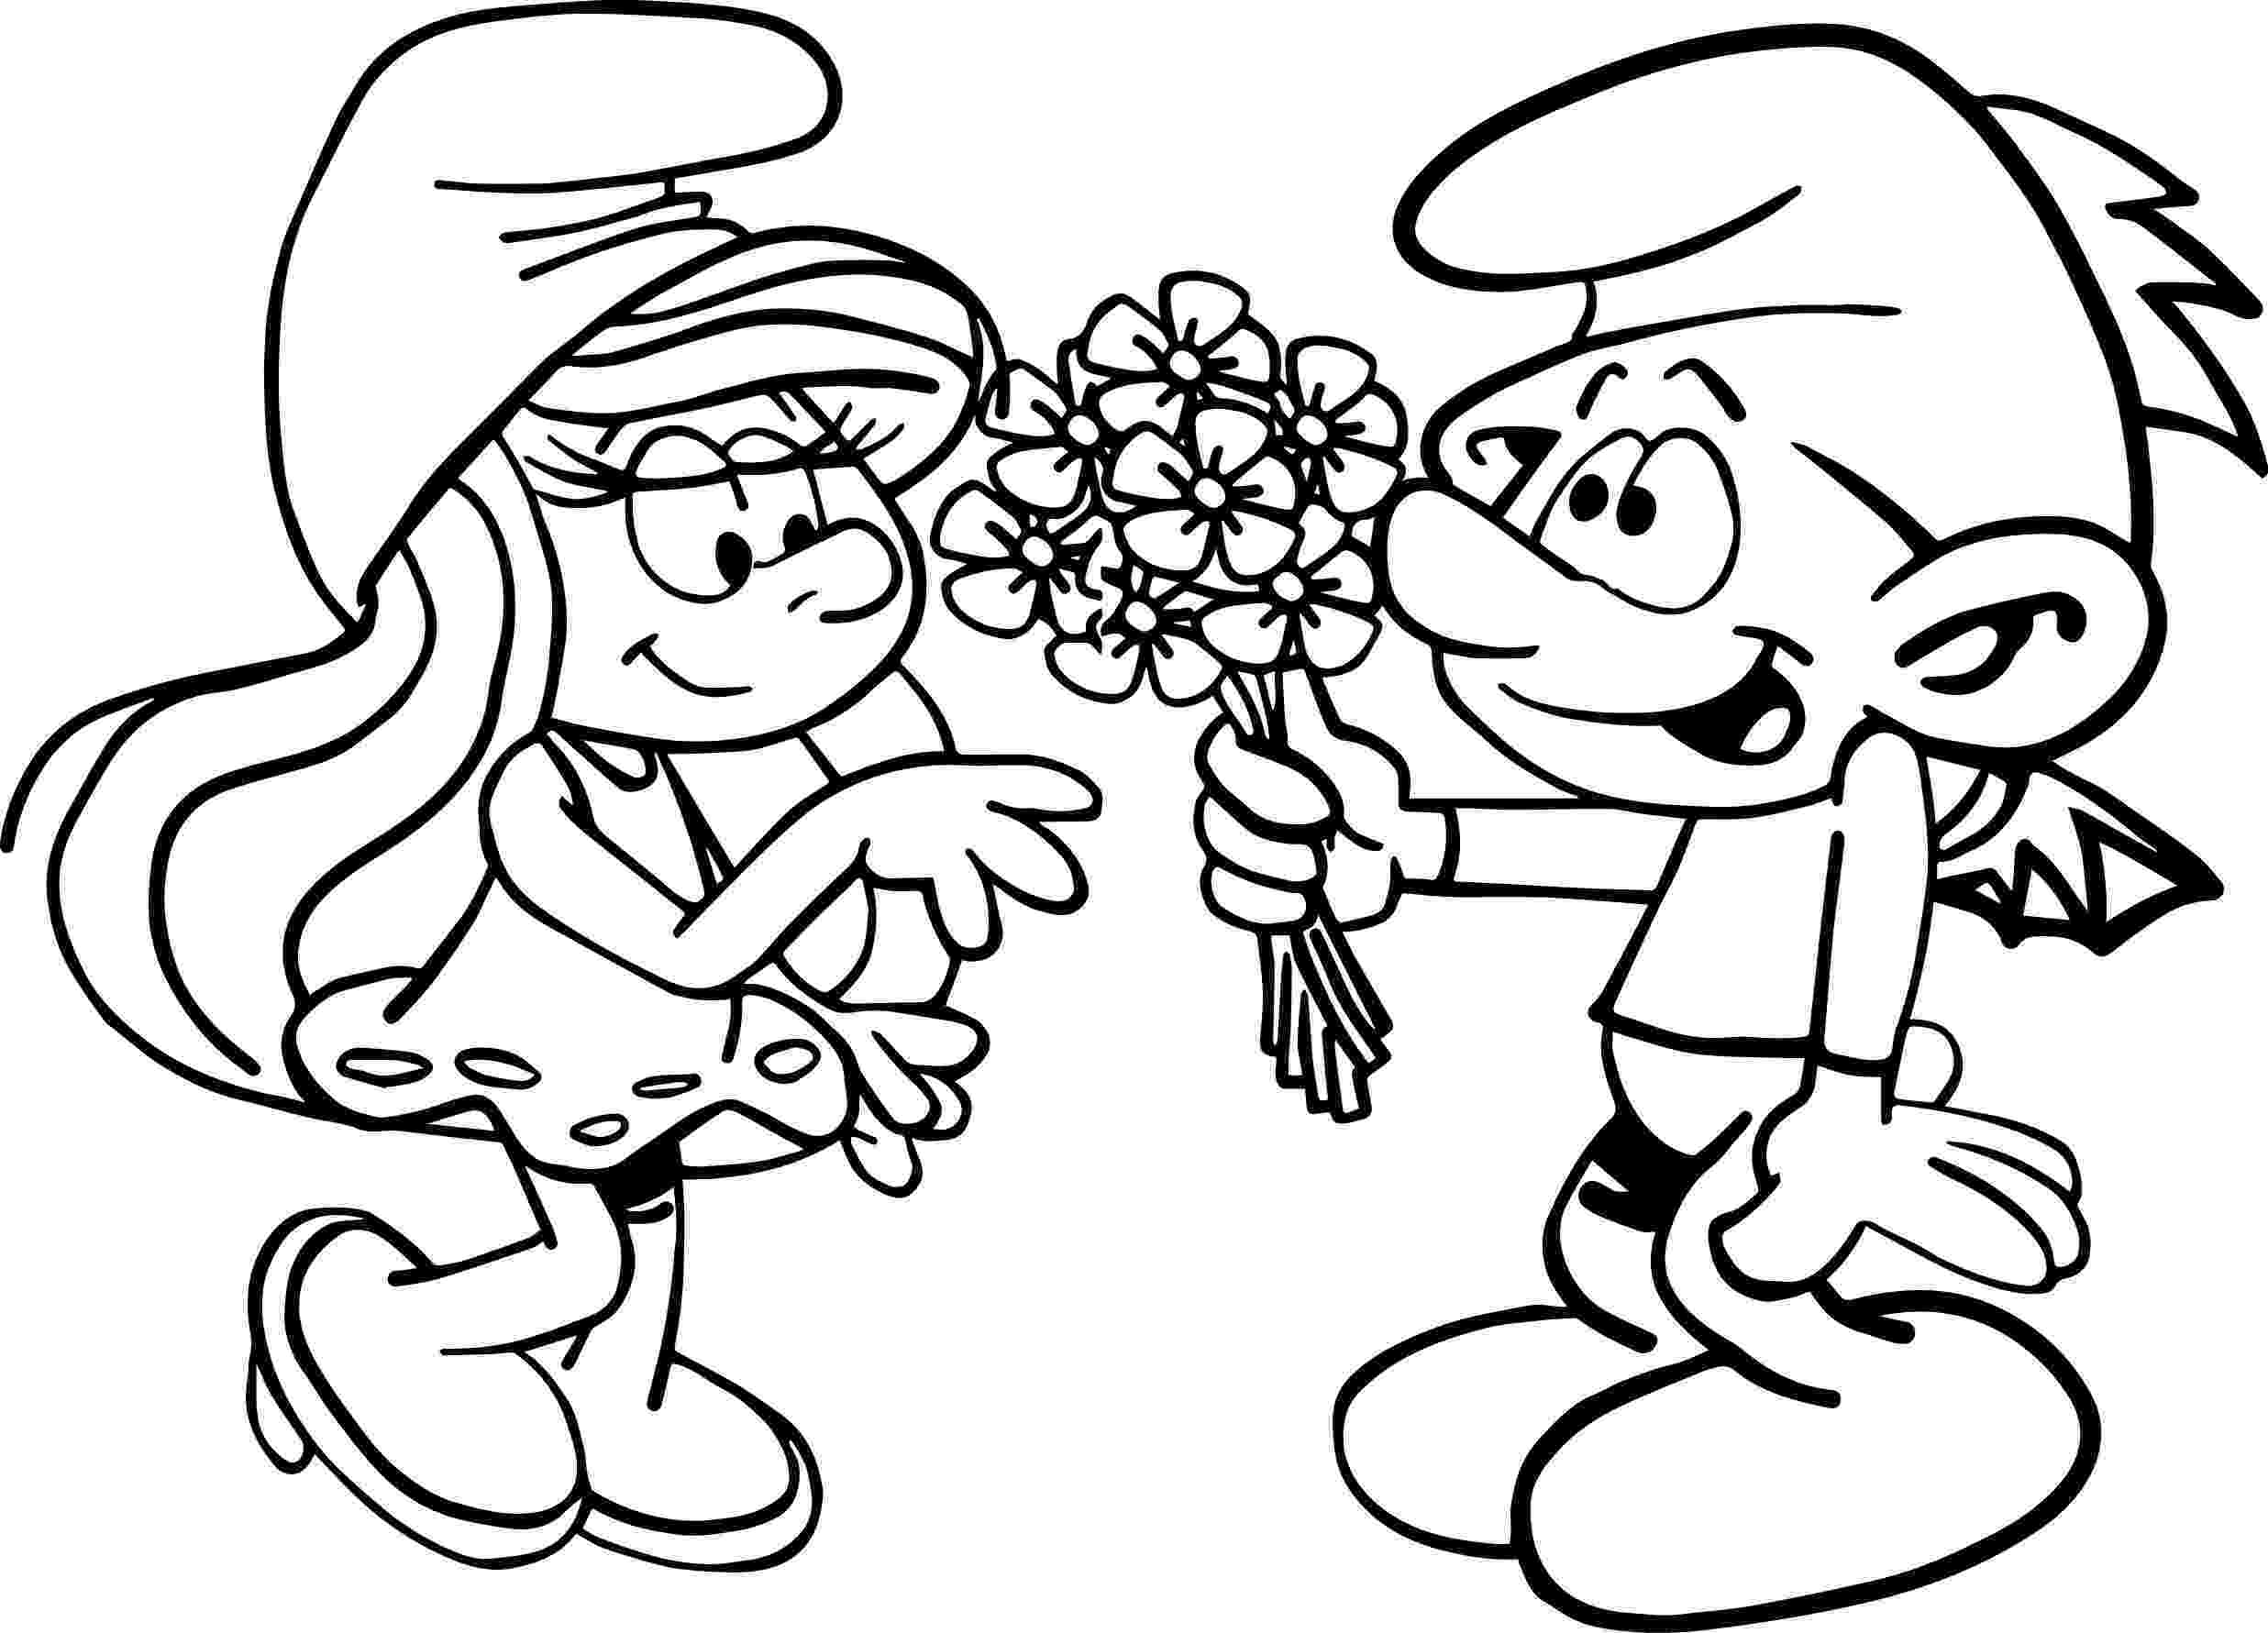 smurf pictures free printable smurf coloring pages for kids smurf pictures 1 2